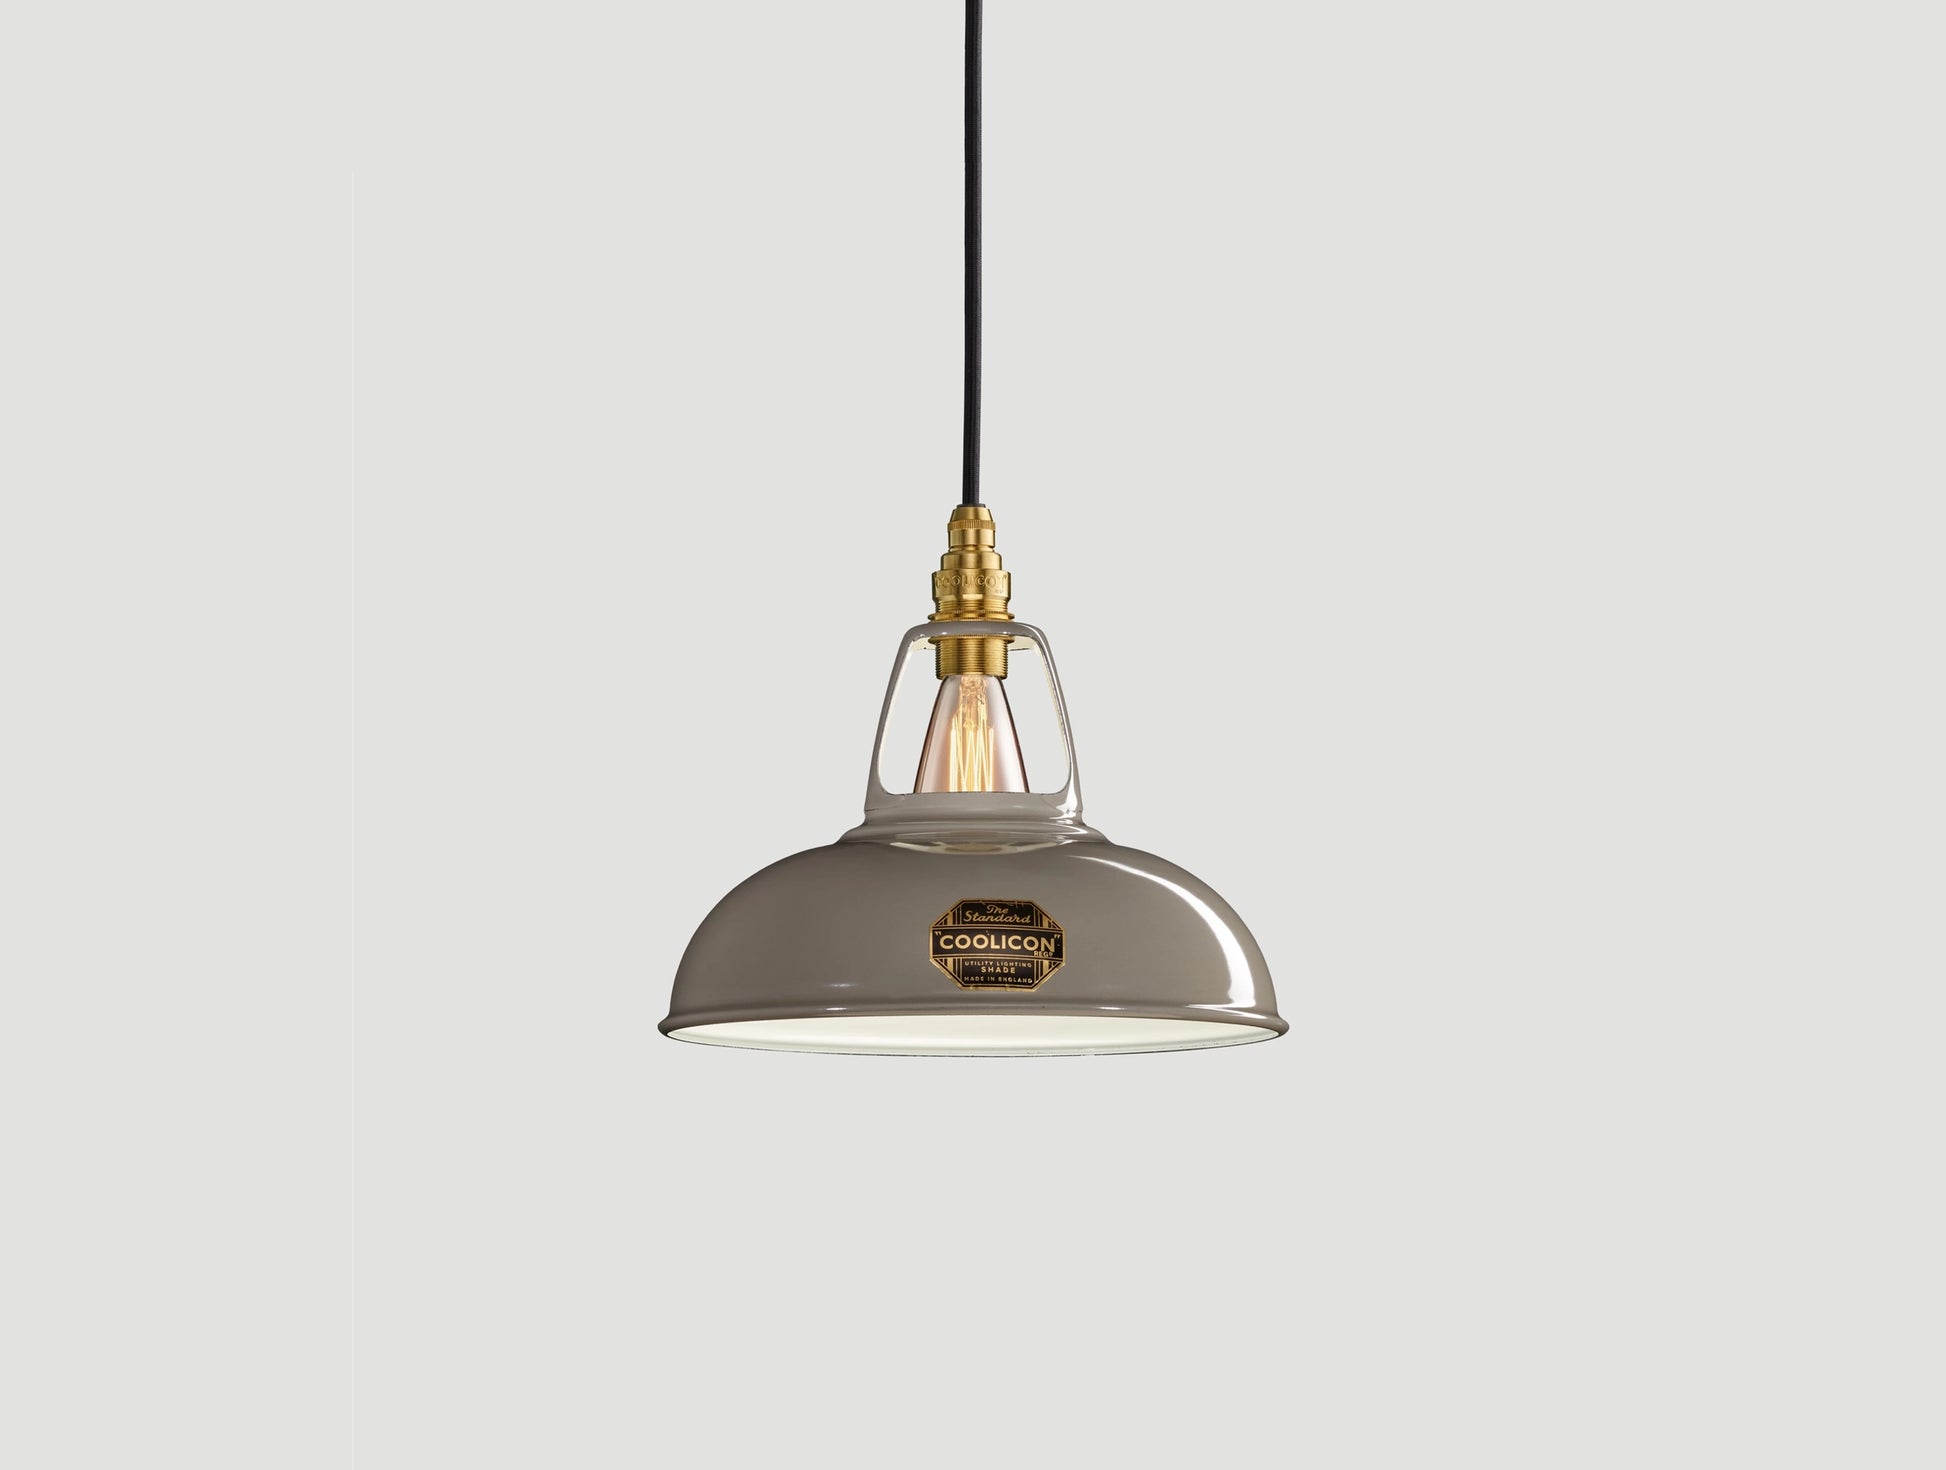 Original Grey Coolicon lampshade with a Signature Brass pendant set over a light grey background